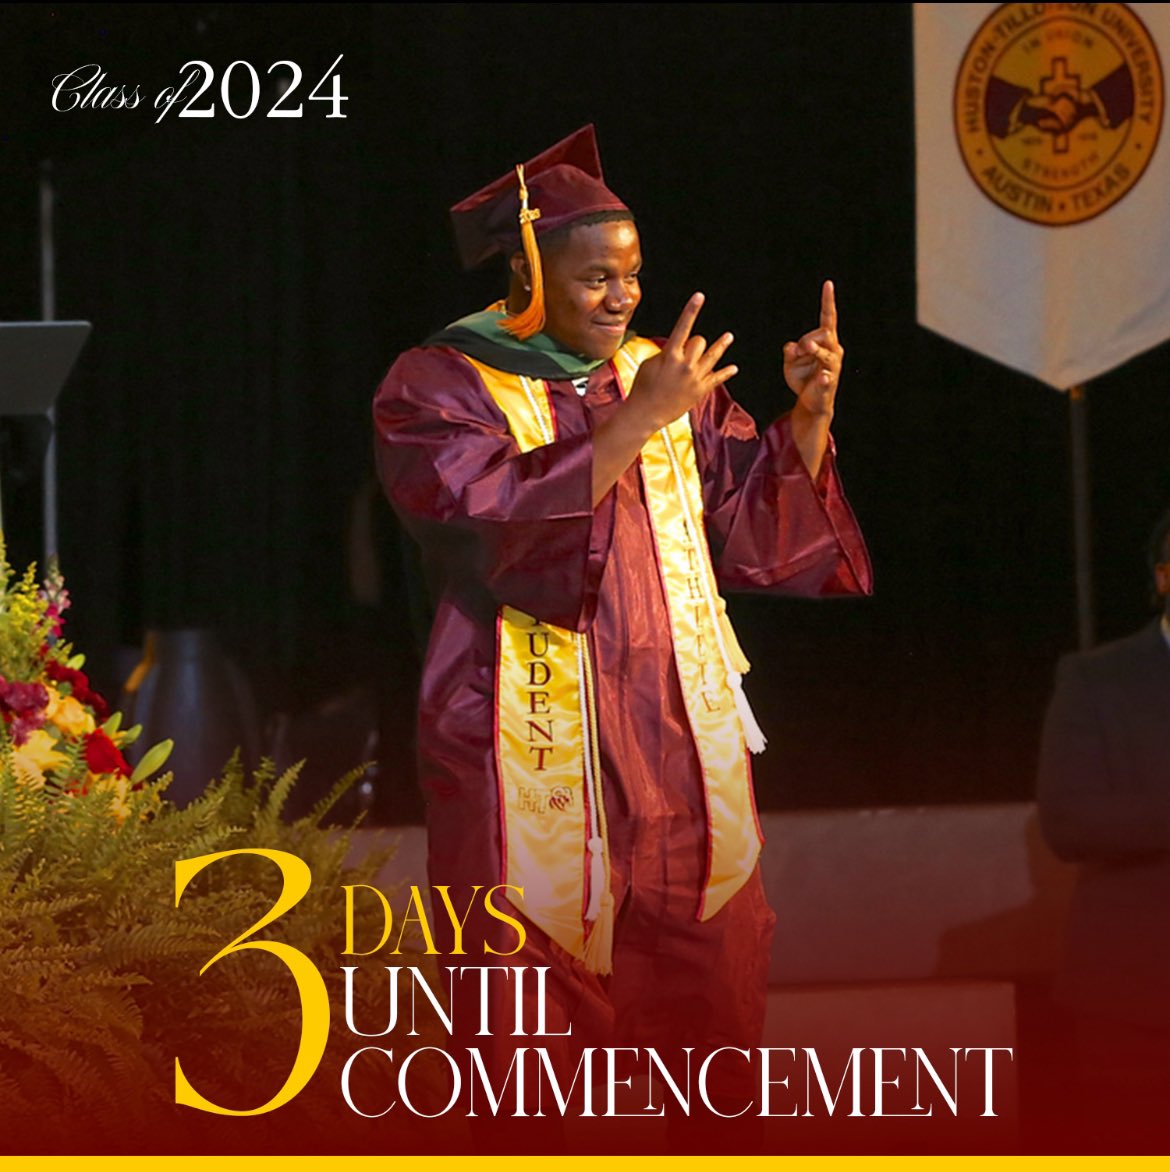 Just 3 days left until Huston-Tillotson University 2024 Commencement! Doors open at 8:15 am at Shoreline Church North. We’re thrilled to honor our scholars and their families. Can’t make it? Visit htu.edu to watch the livestream, Saturday, May 4th! #HTYou